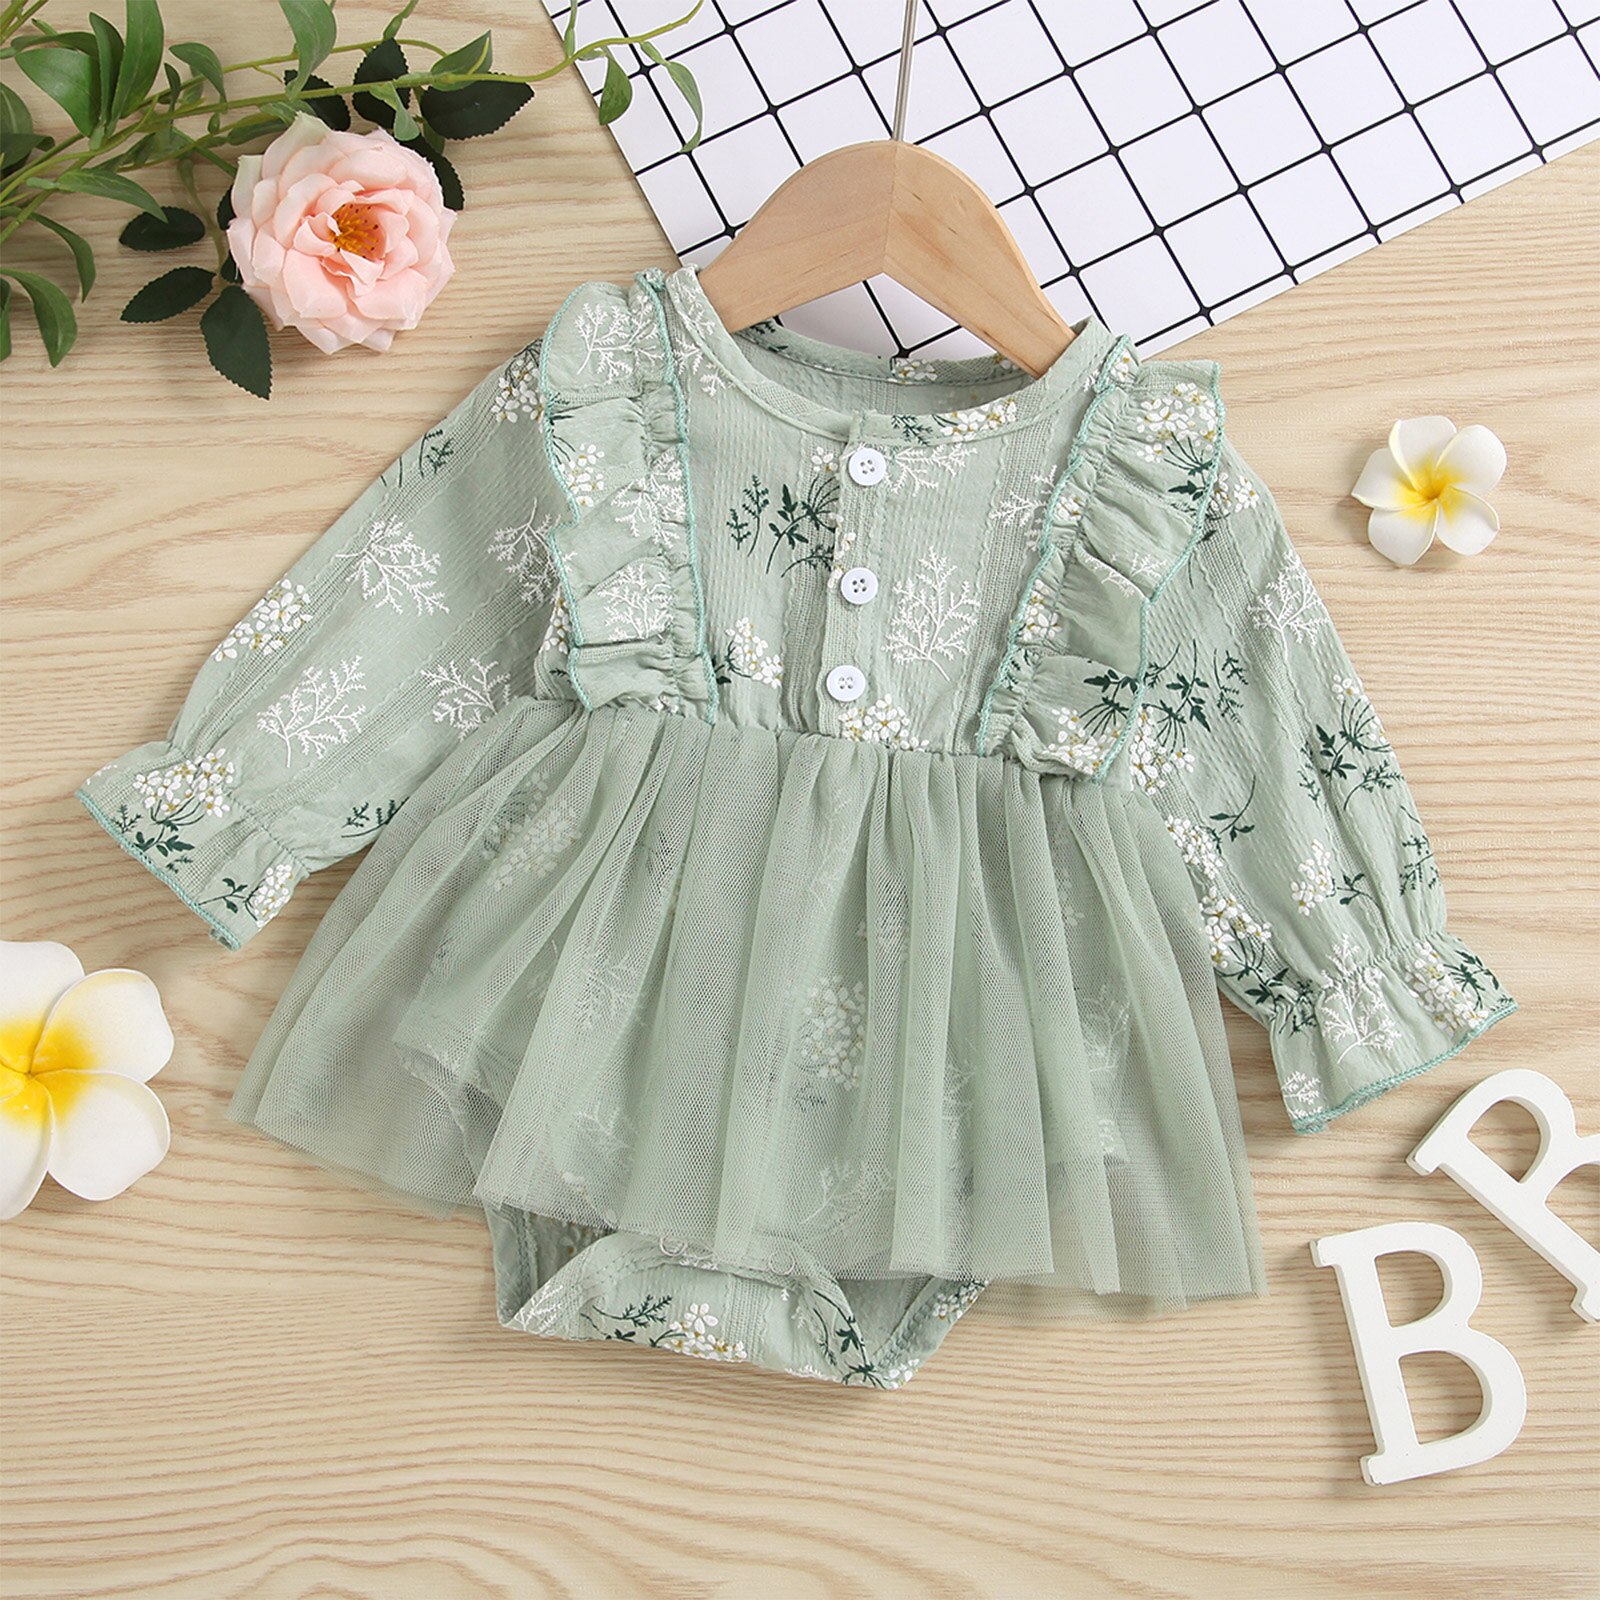 Ma-Baby-0-18M-Infant-Newborn-Baby-Girls-Rompers-Lace-Floral-Jumpsuit-Playsuit-Outfits-Autumn-Spring-3